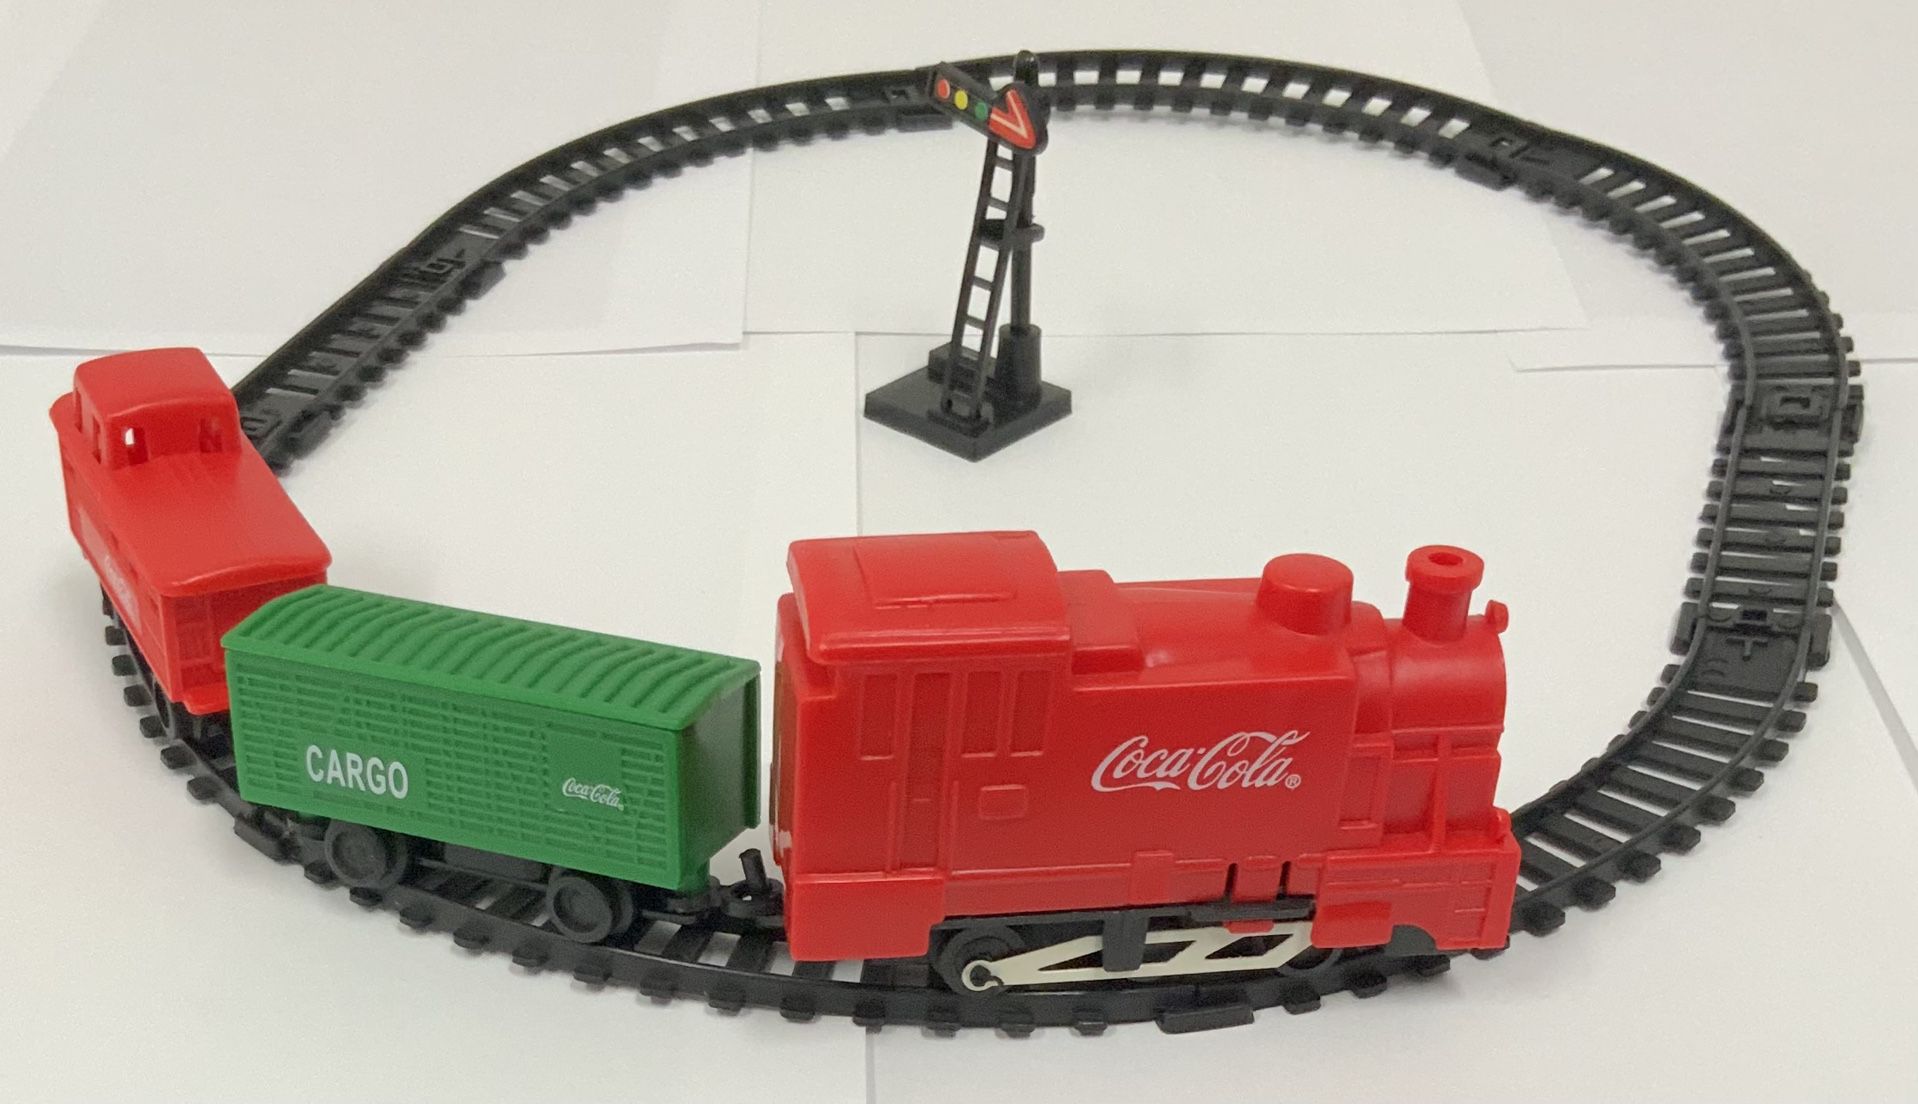 Coca-Cola Battery Operated Train Set From Popcorn Tin Tested and Working